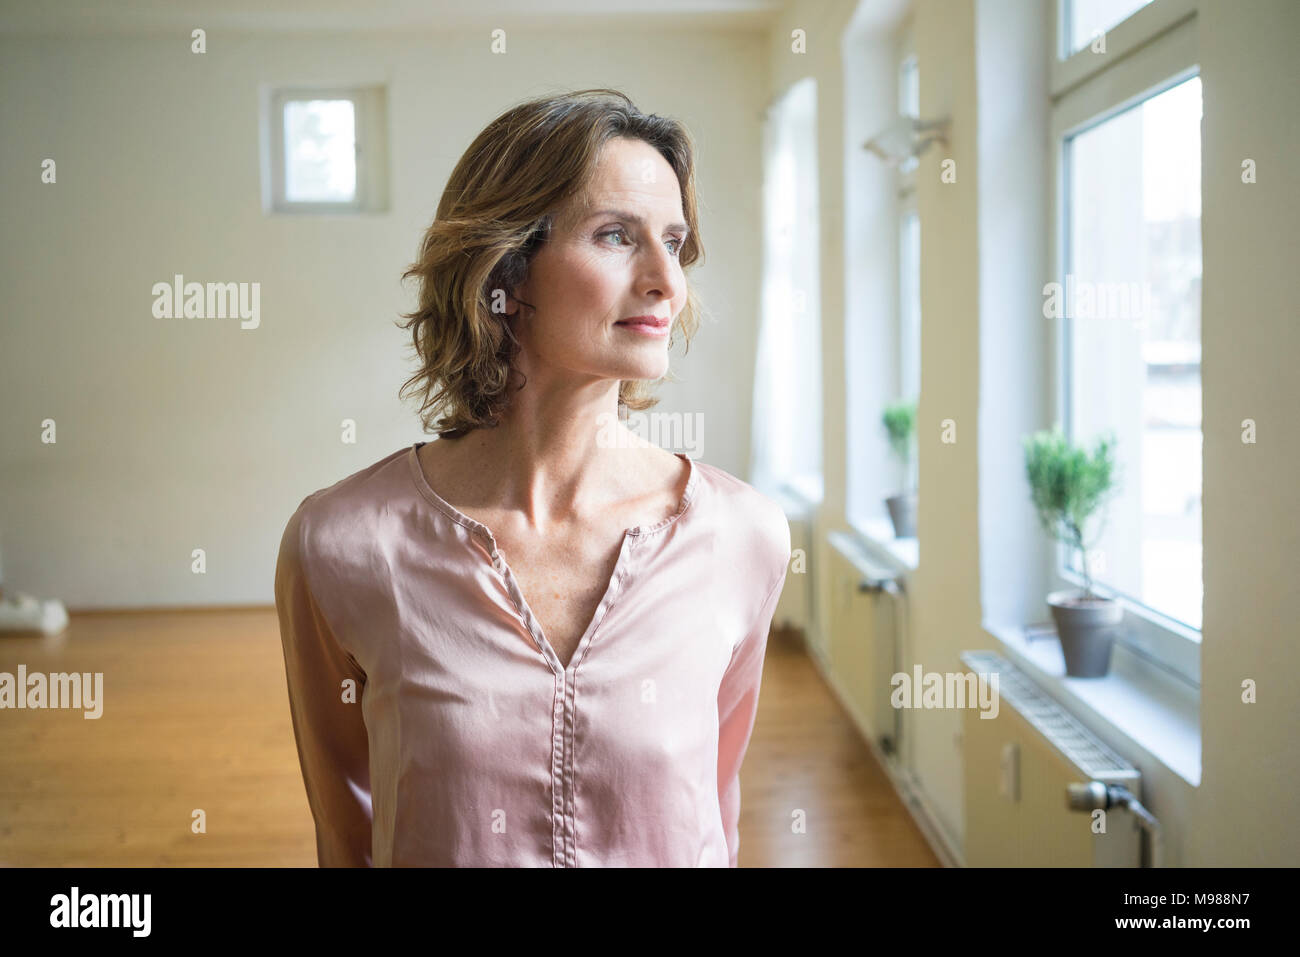 Pensive mature woman in empty room Stock Photo